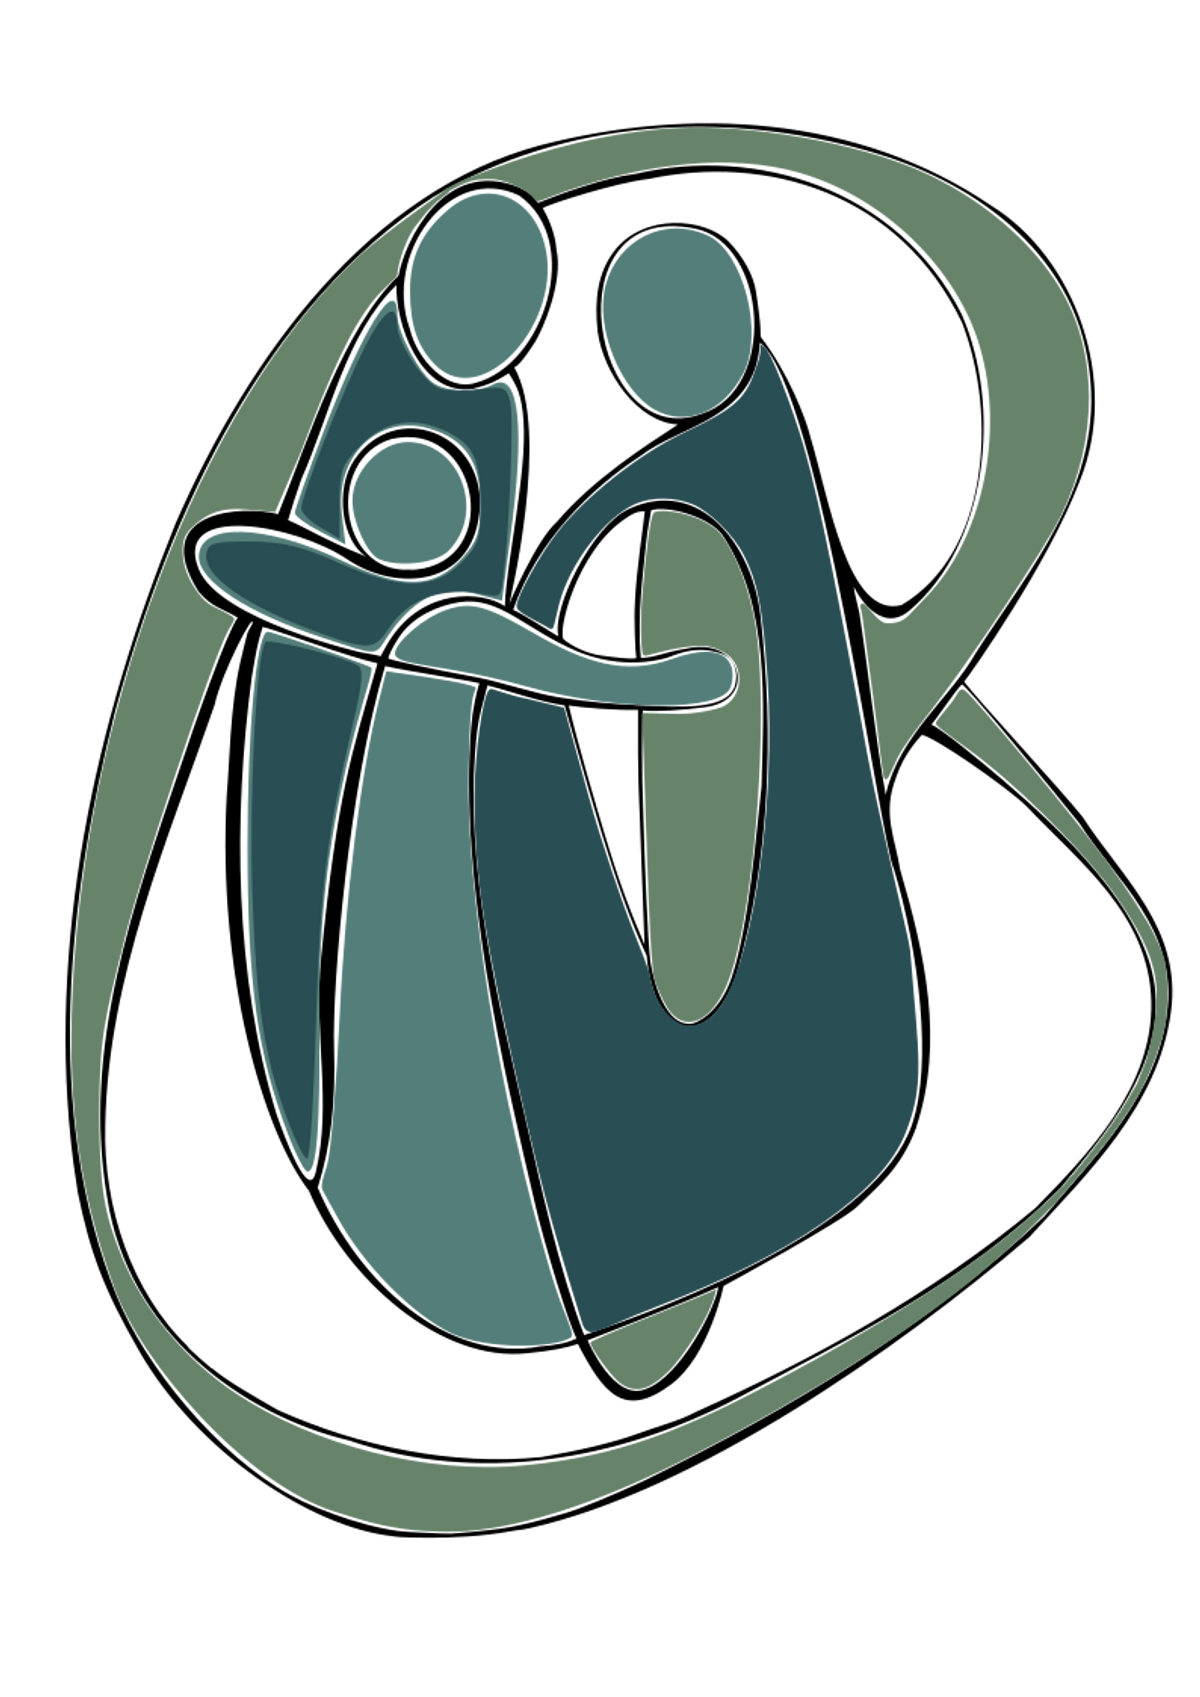 A stylized representation of parents using their body to shelter and at the same time lift an offspring